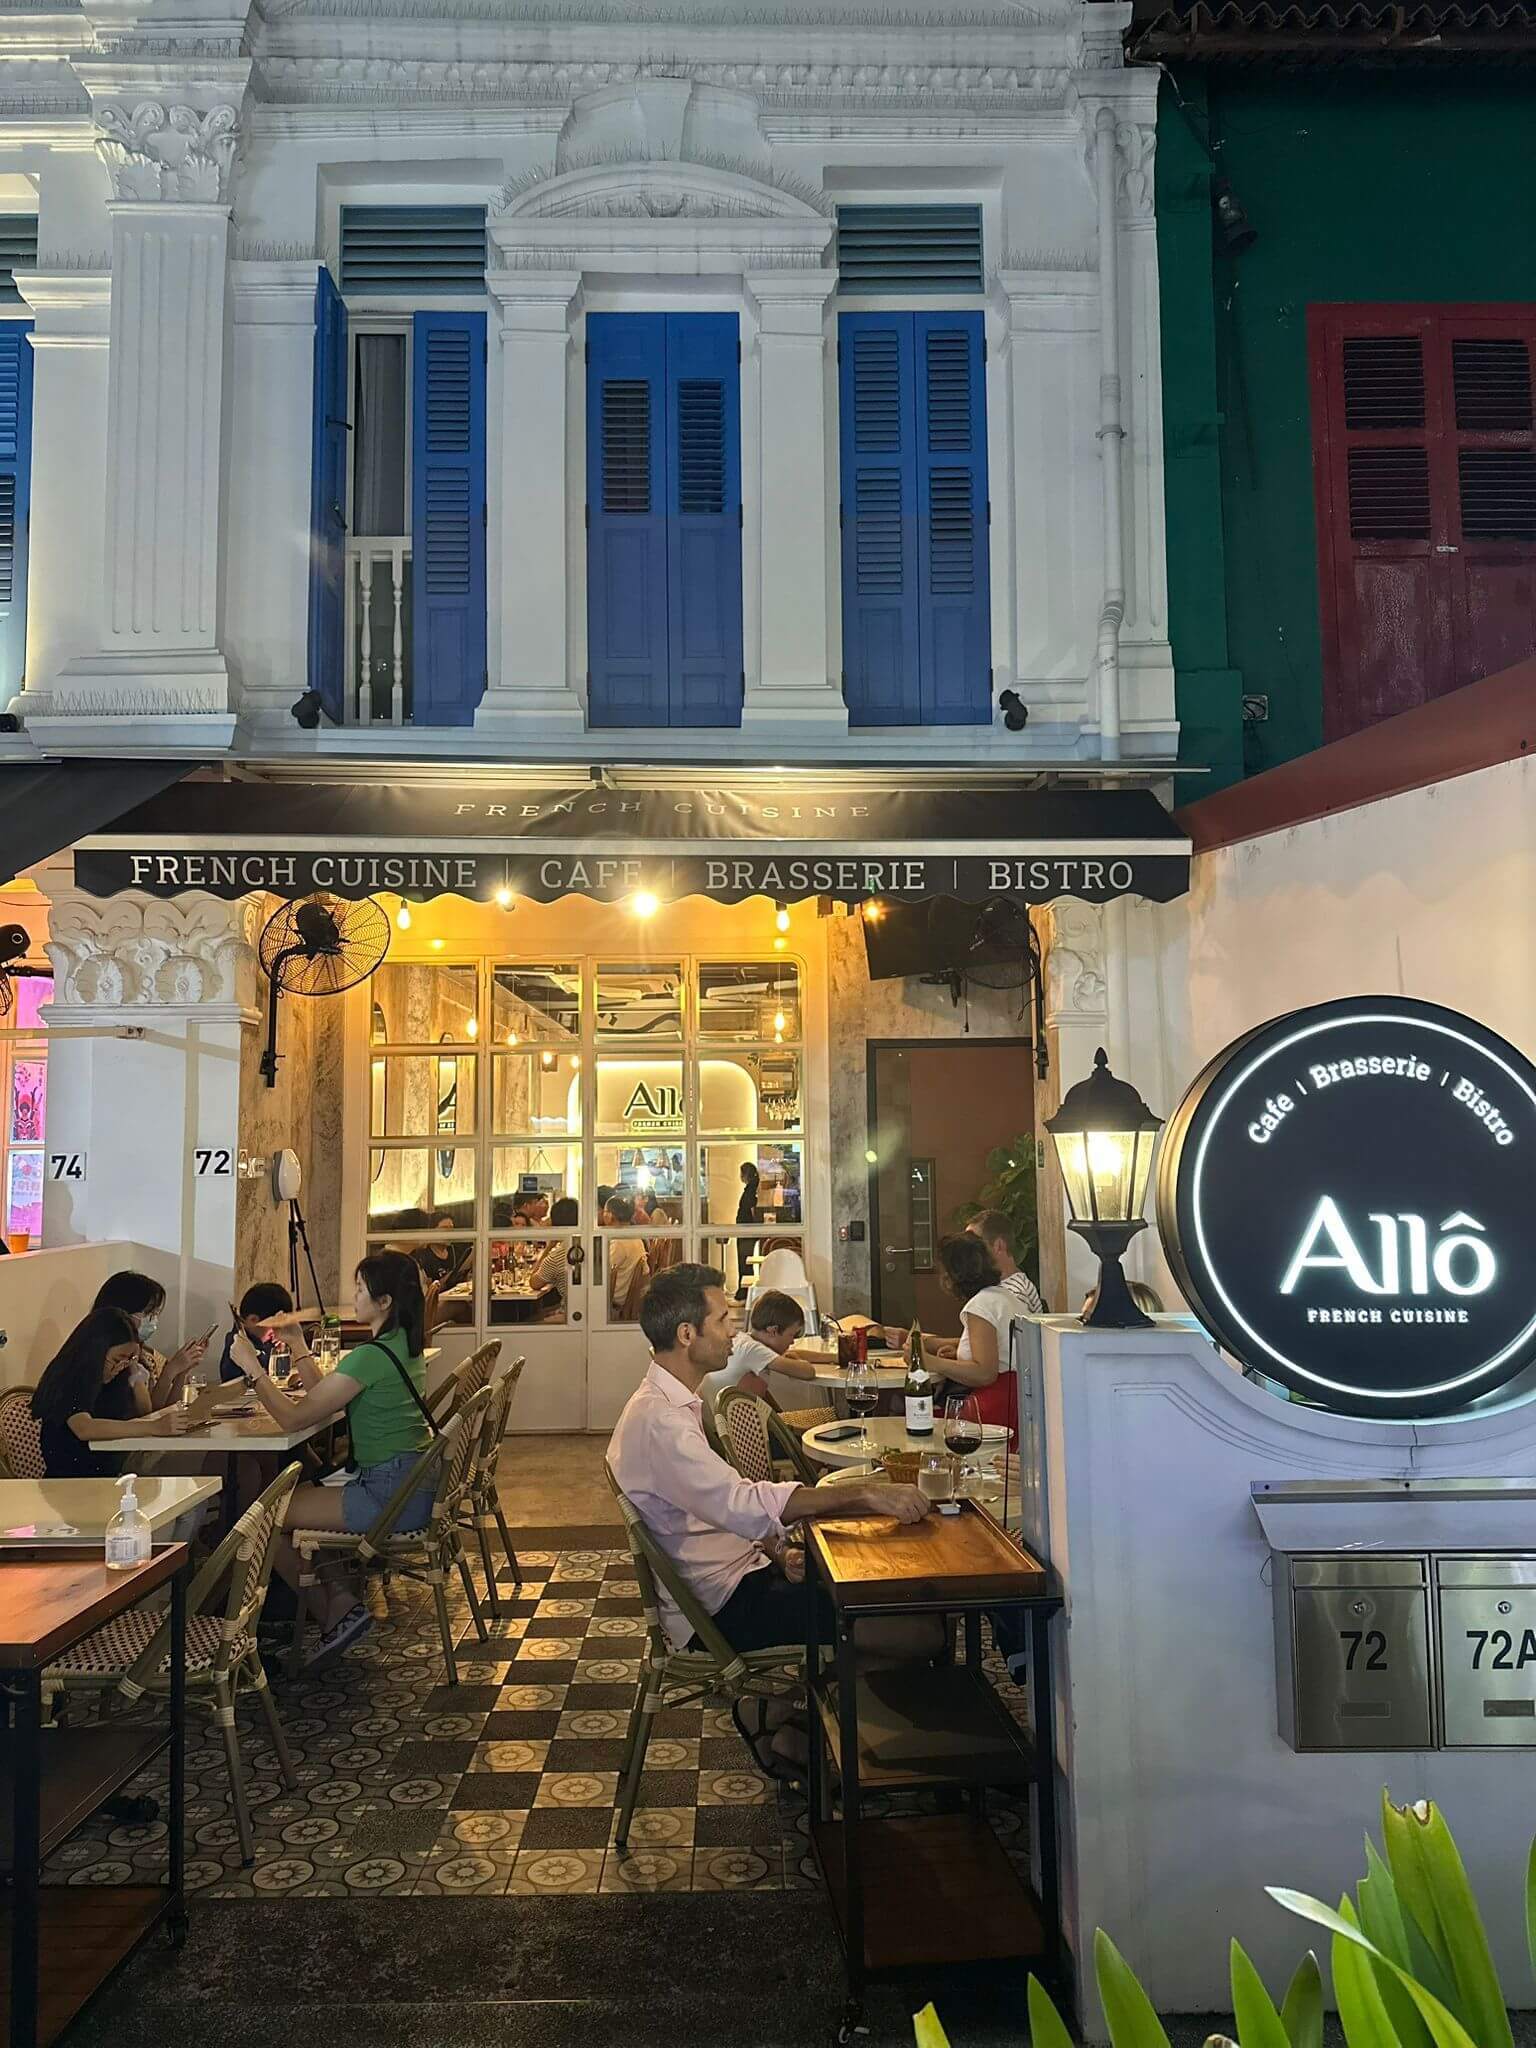 (Expired)Allô French Cuisine Restaurant for Sale/Takeover/Expansion - Fully Equipped with Excellent Reviews